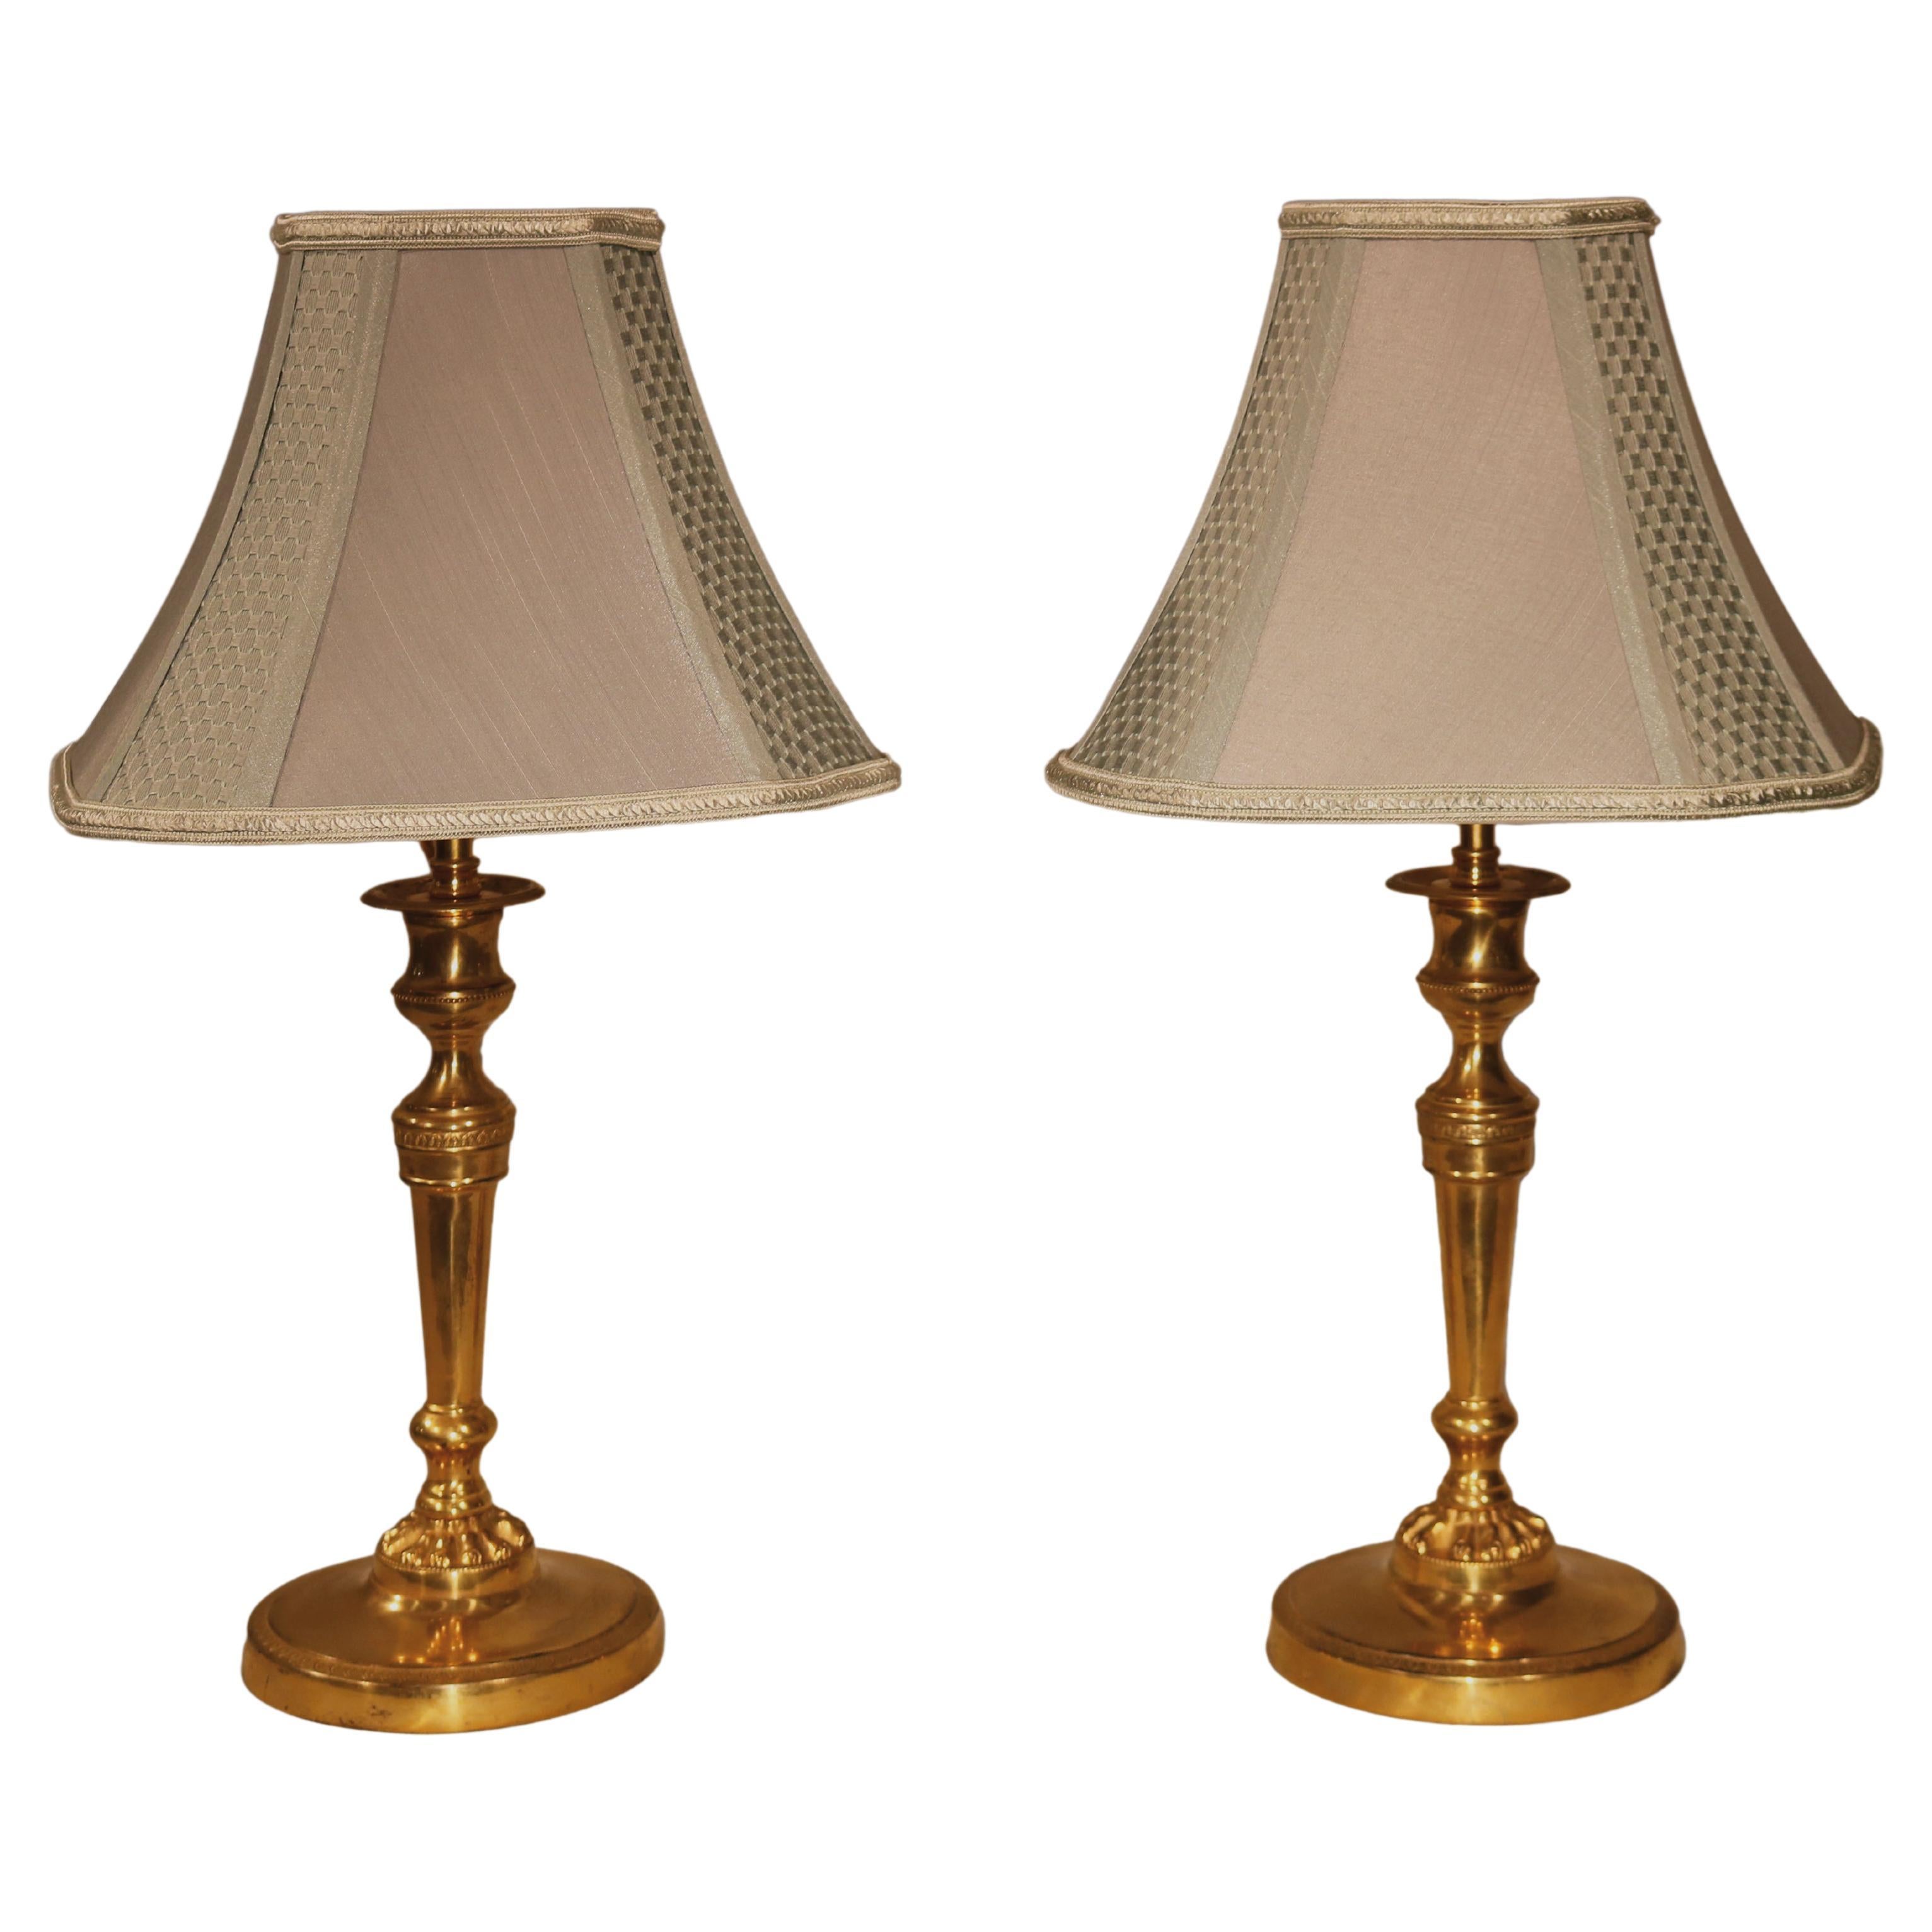 Pair of Early 19th Century Ormolu Candlestick Lamps